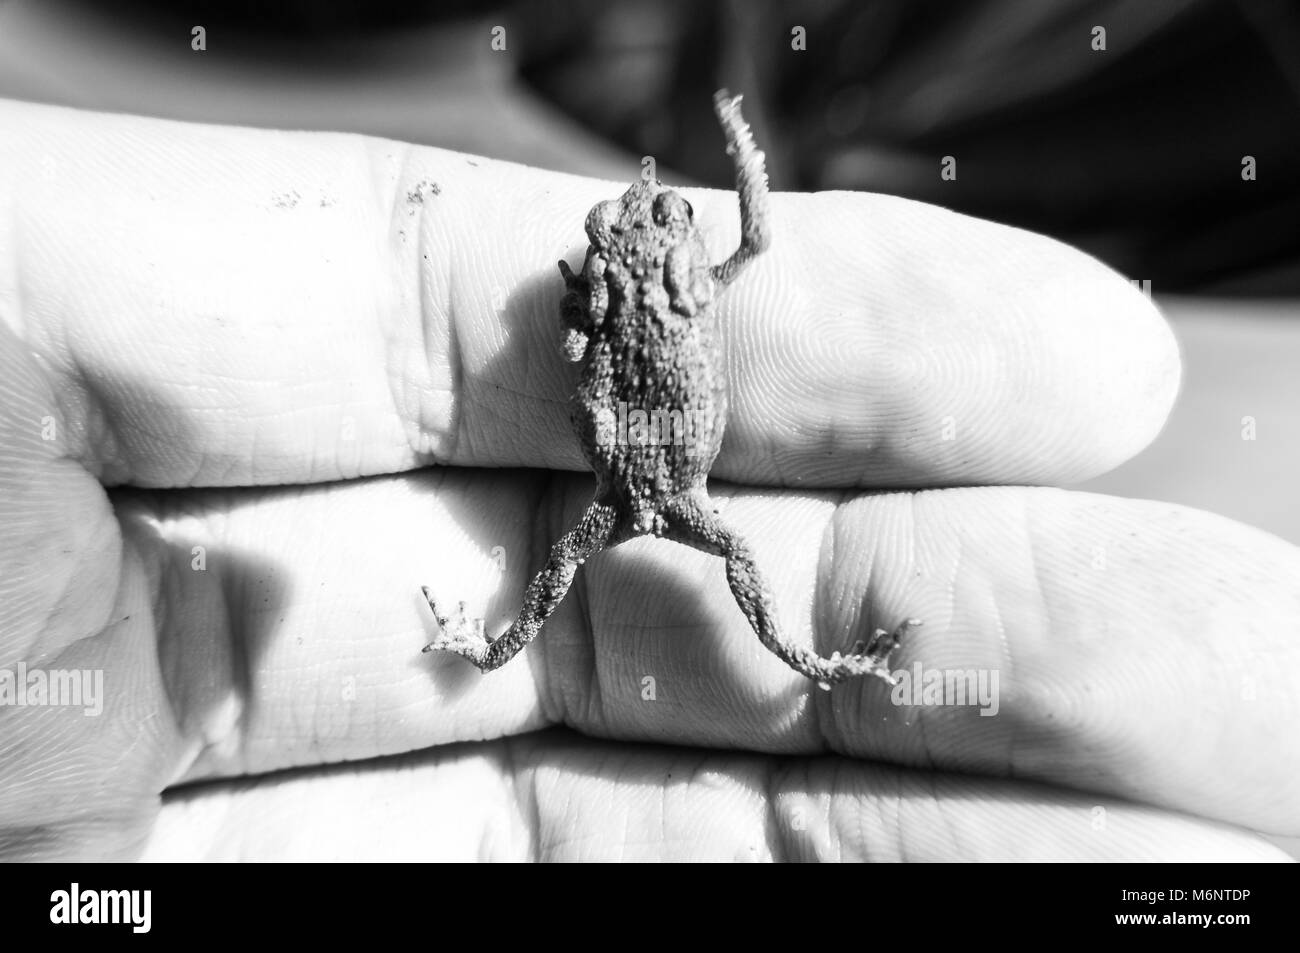 Small amphibian Common toad climbing up on man's hand in black and white shot Stock Photo